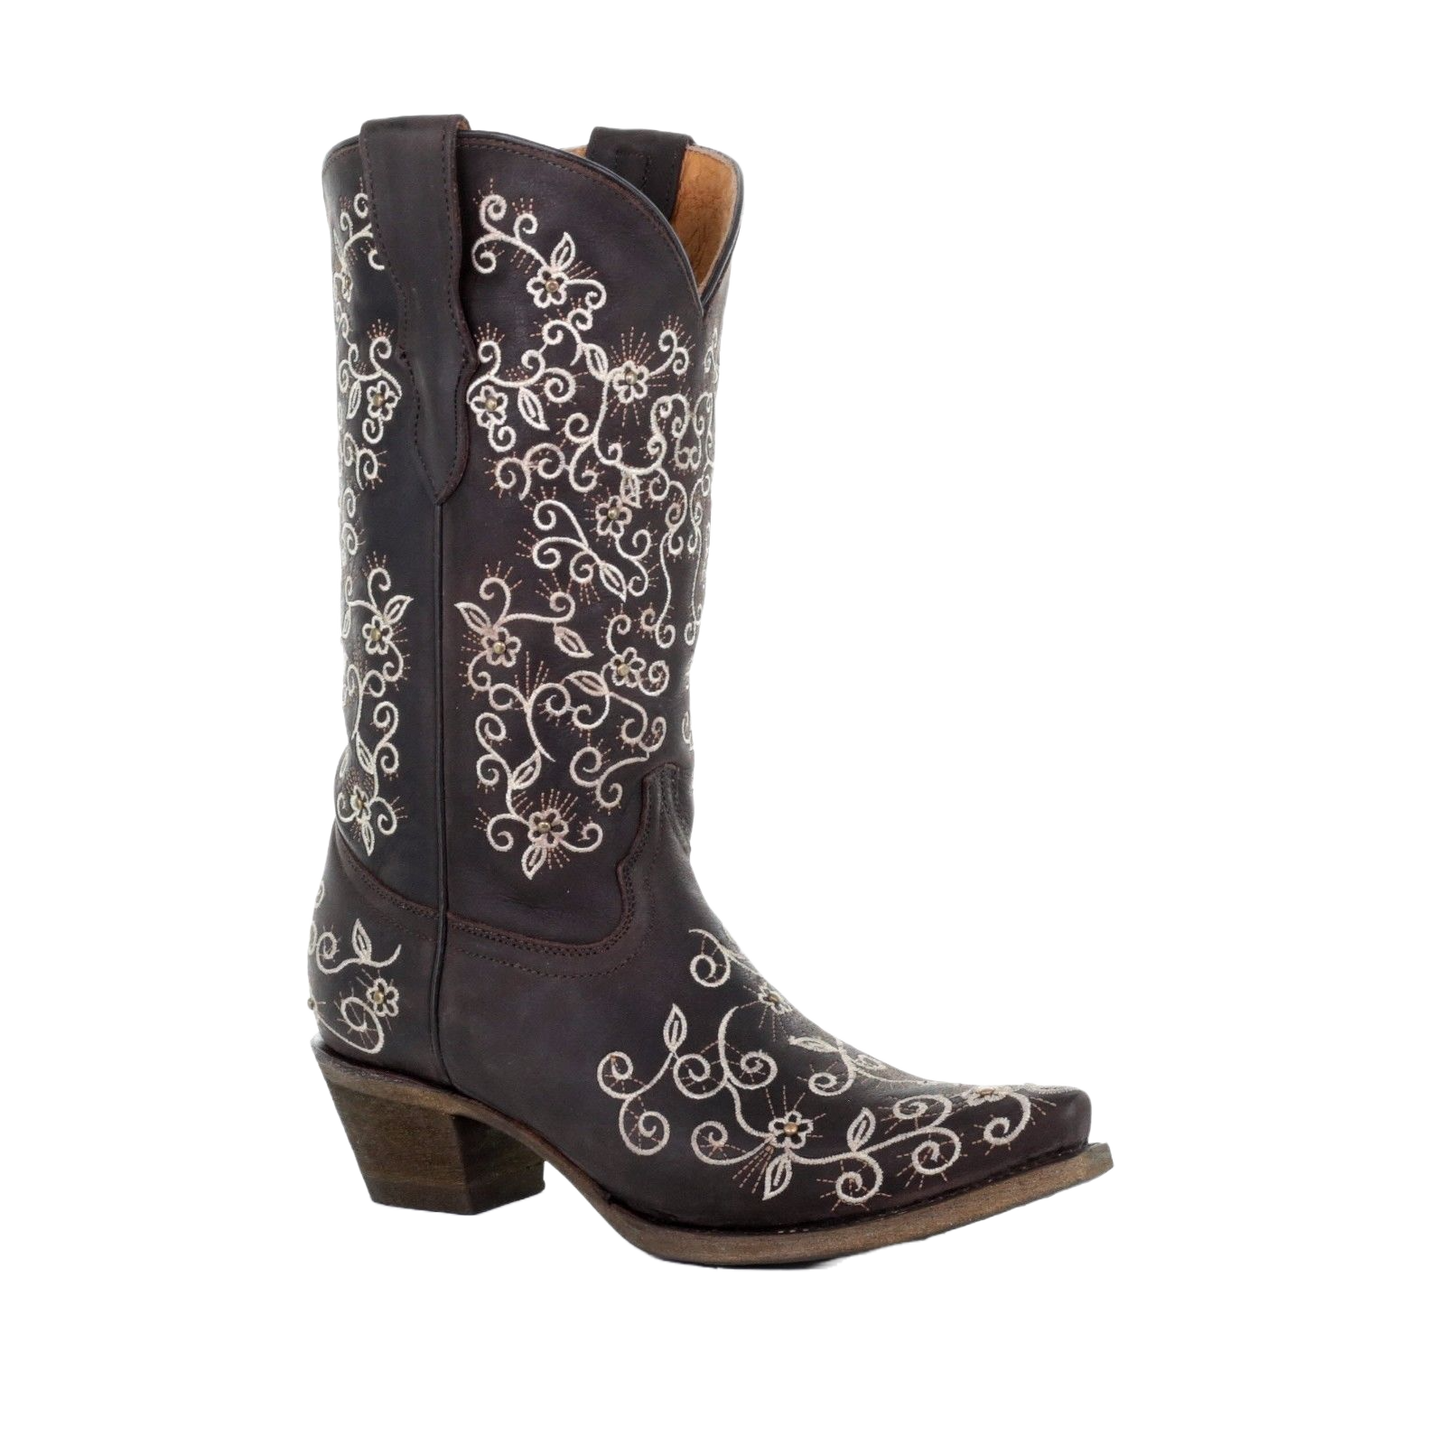 Corral Children's Brown Floral Embroidered Boot E1309